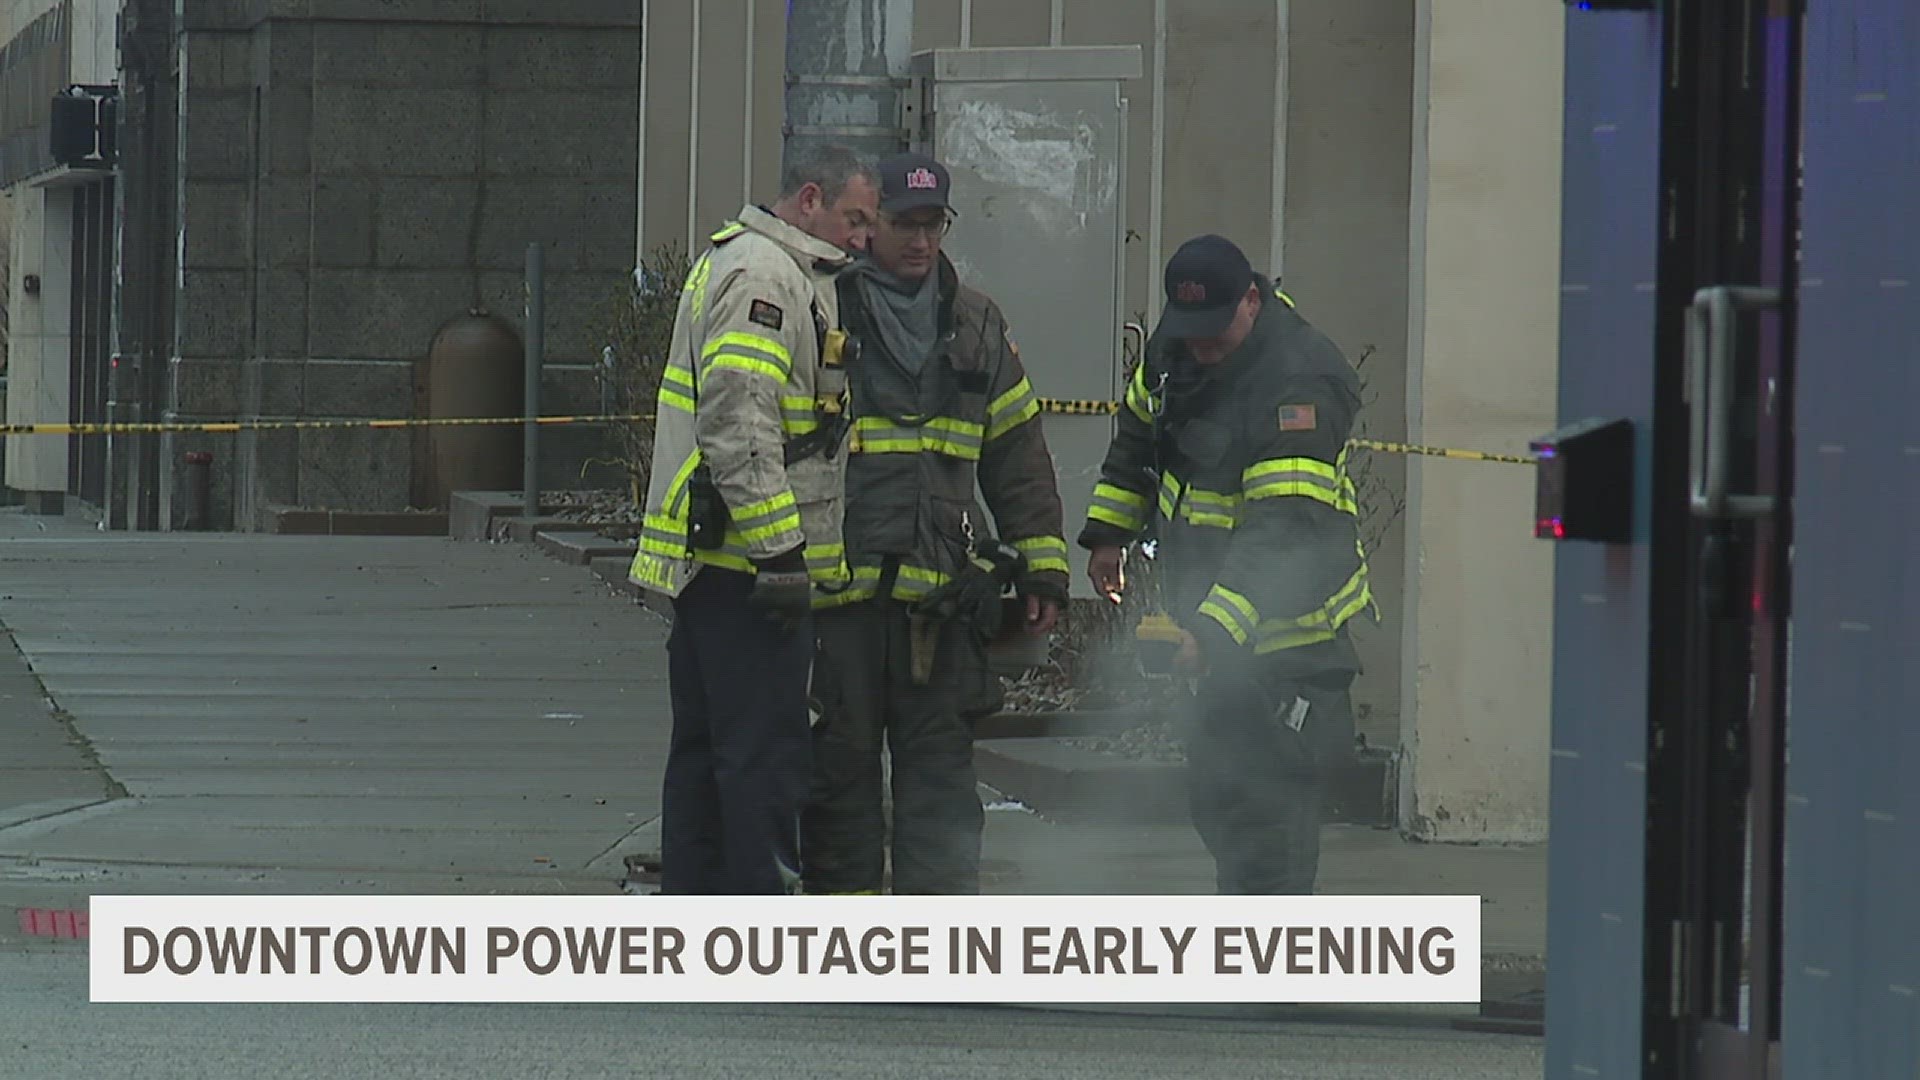 More than 5,600 customers lost power before it was eventually restored.